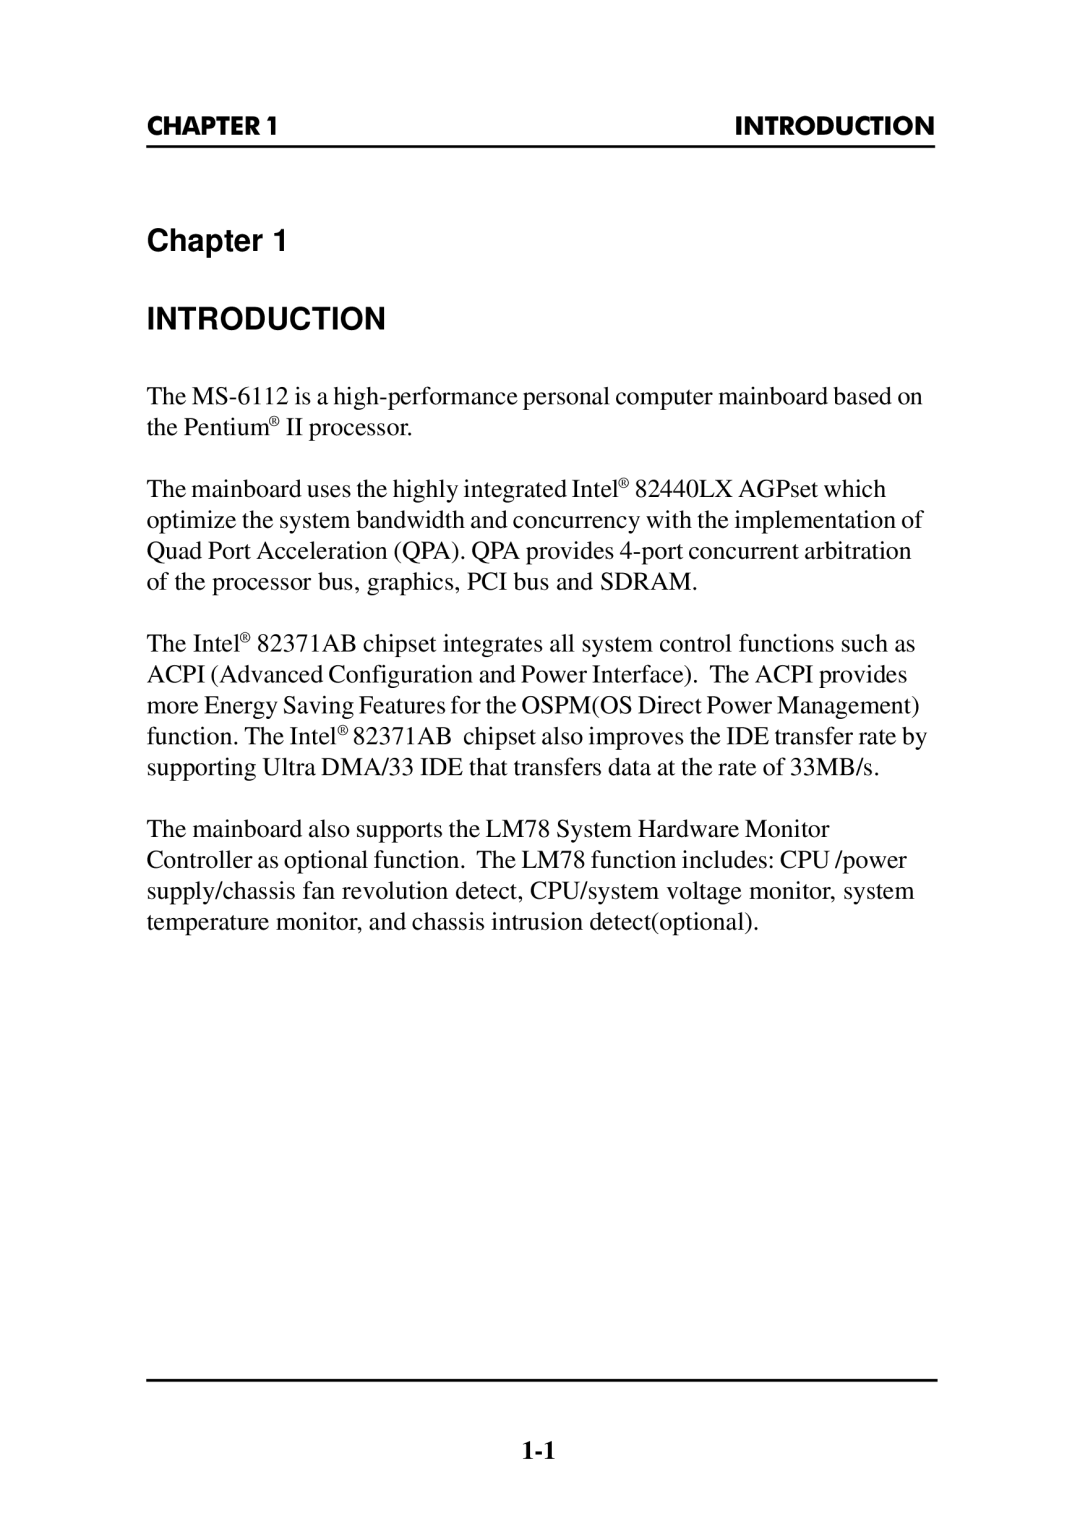 Intel MS-6112 manual Chapter INTRODUCTION 